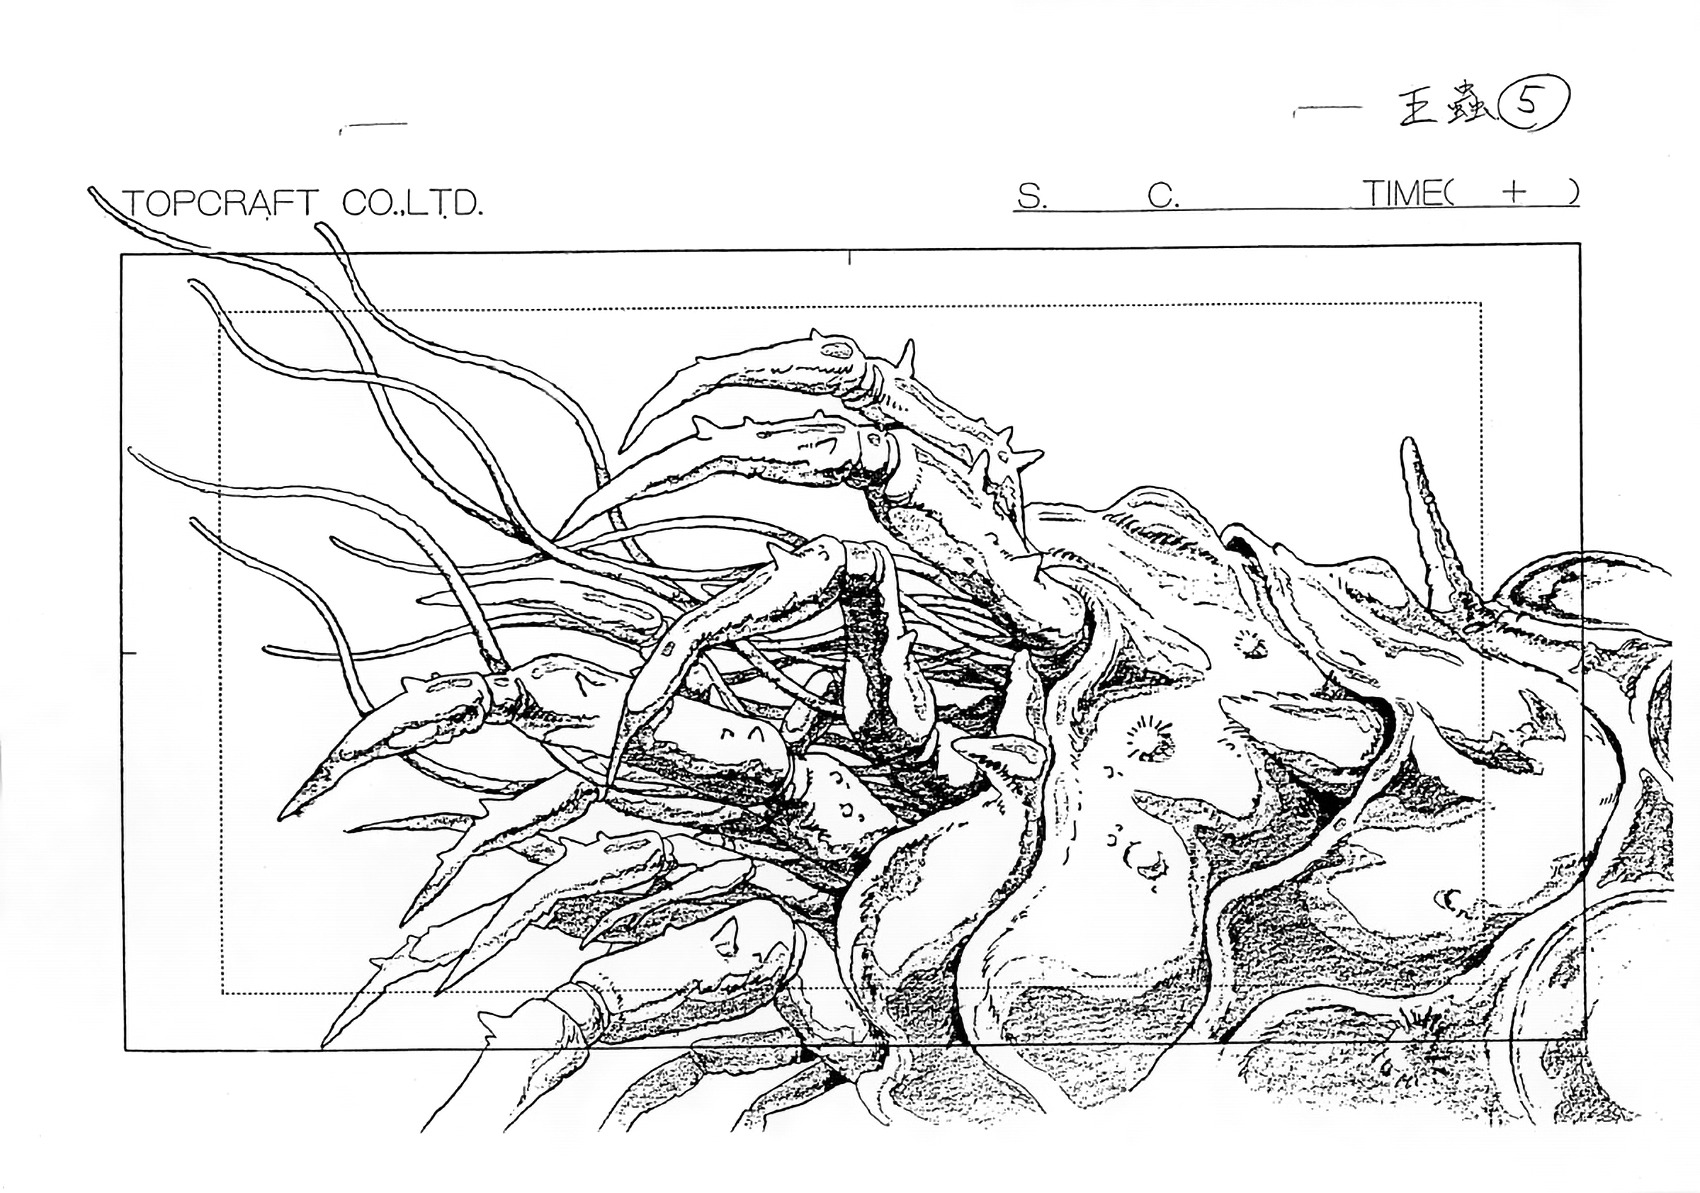 artist_unknown genga layout nausicaä_of_the_valley_of_the_wind production_materials